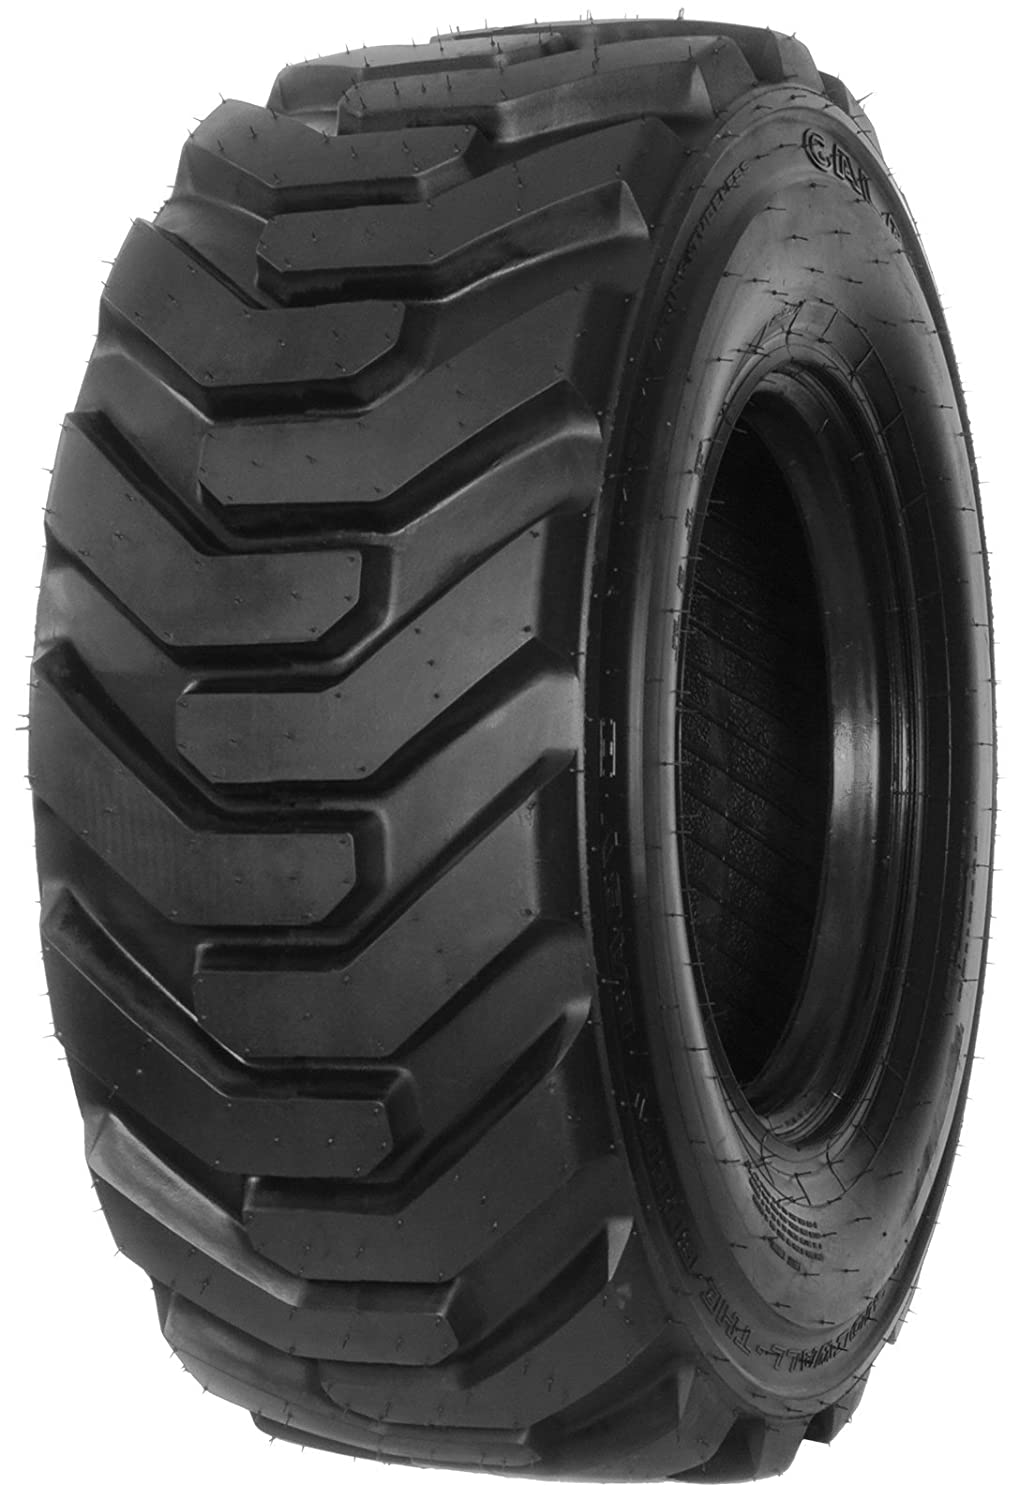 product_type-industrial_tires Galaxy Beefy Baby R-4 14PR TL 12.5/80 R18 P